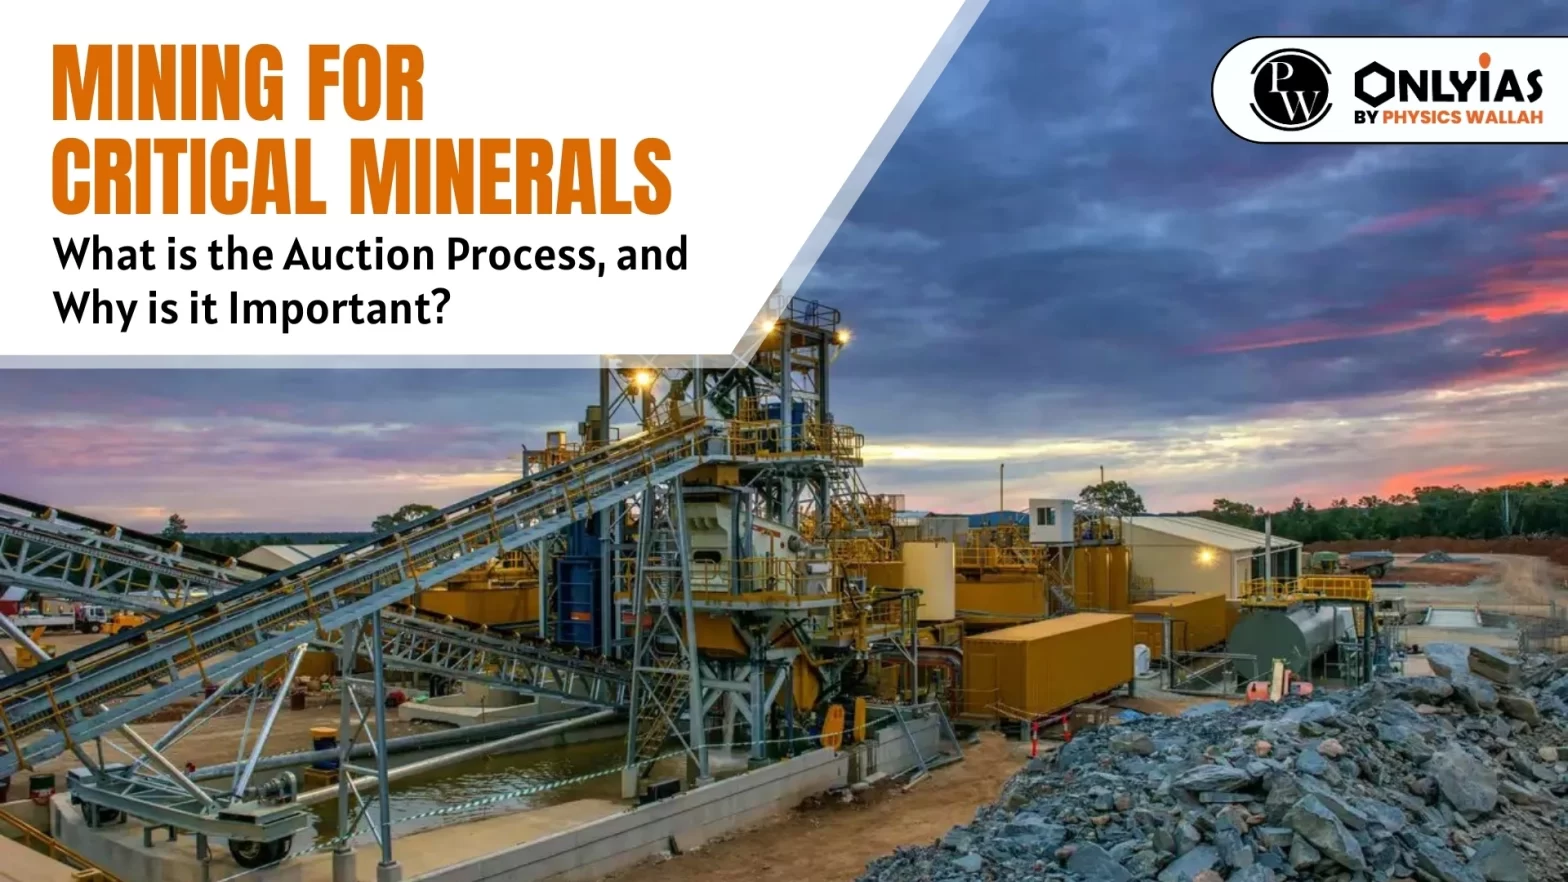 Mining For Critical Minerals: What is the Auction Process, and Why is it Important?